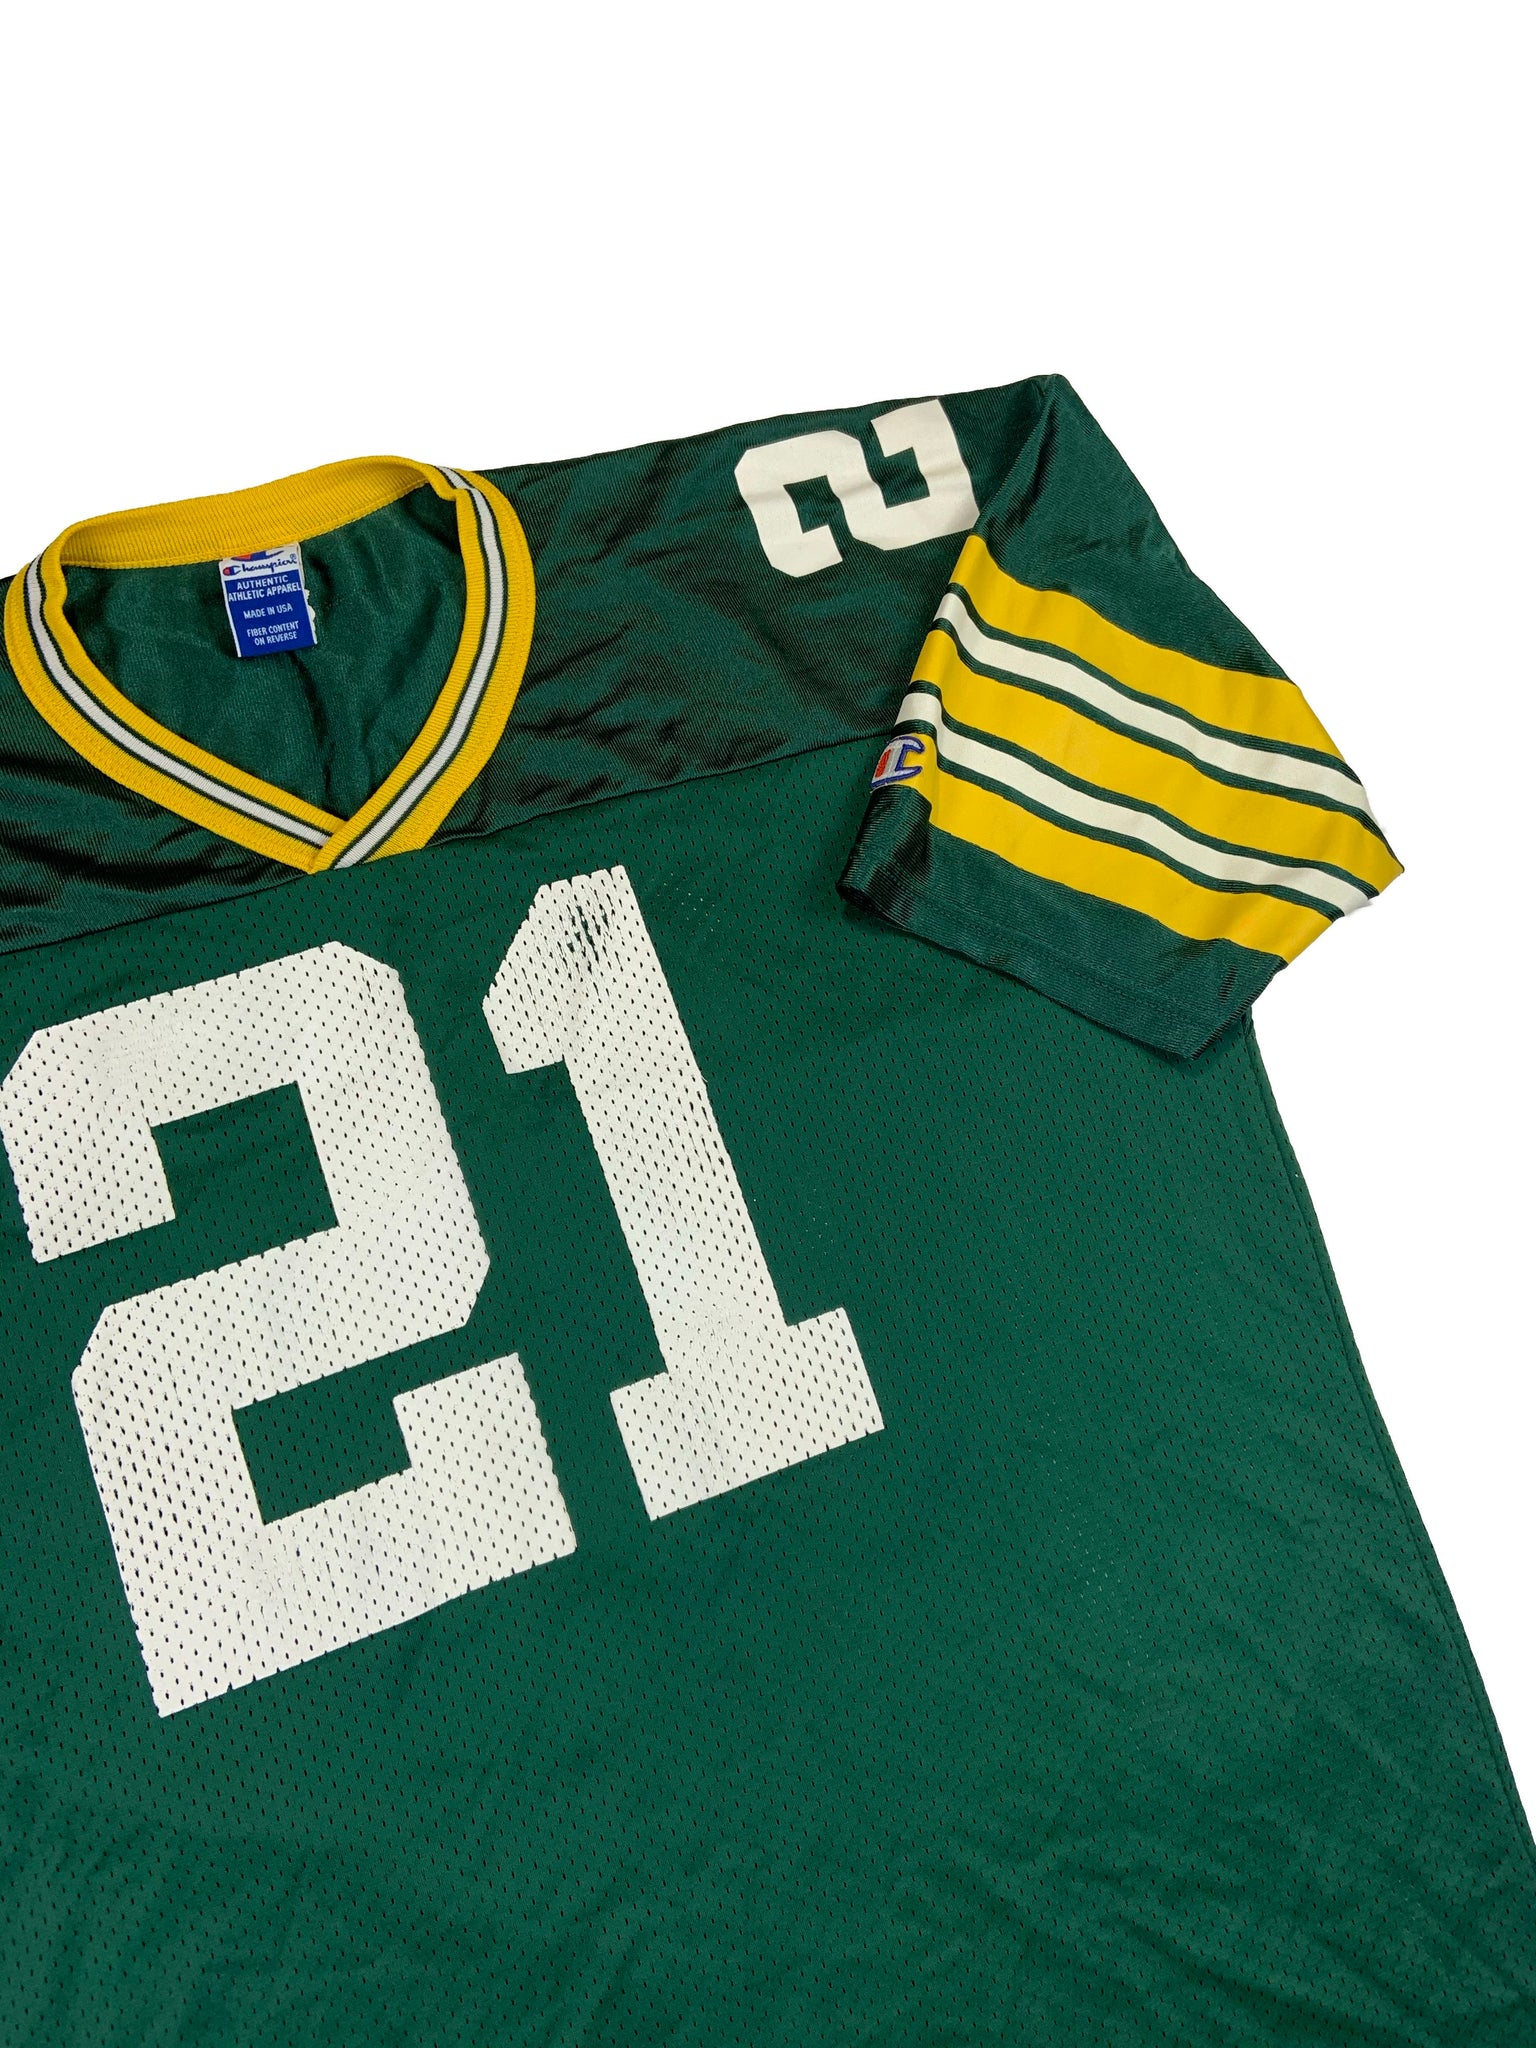 nfl shop green bay packers jersey